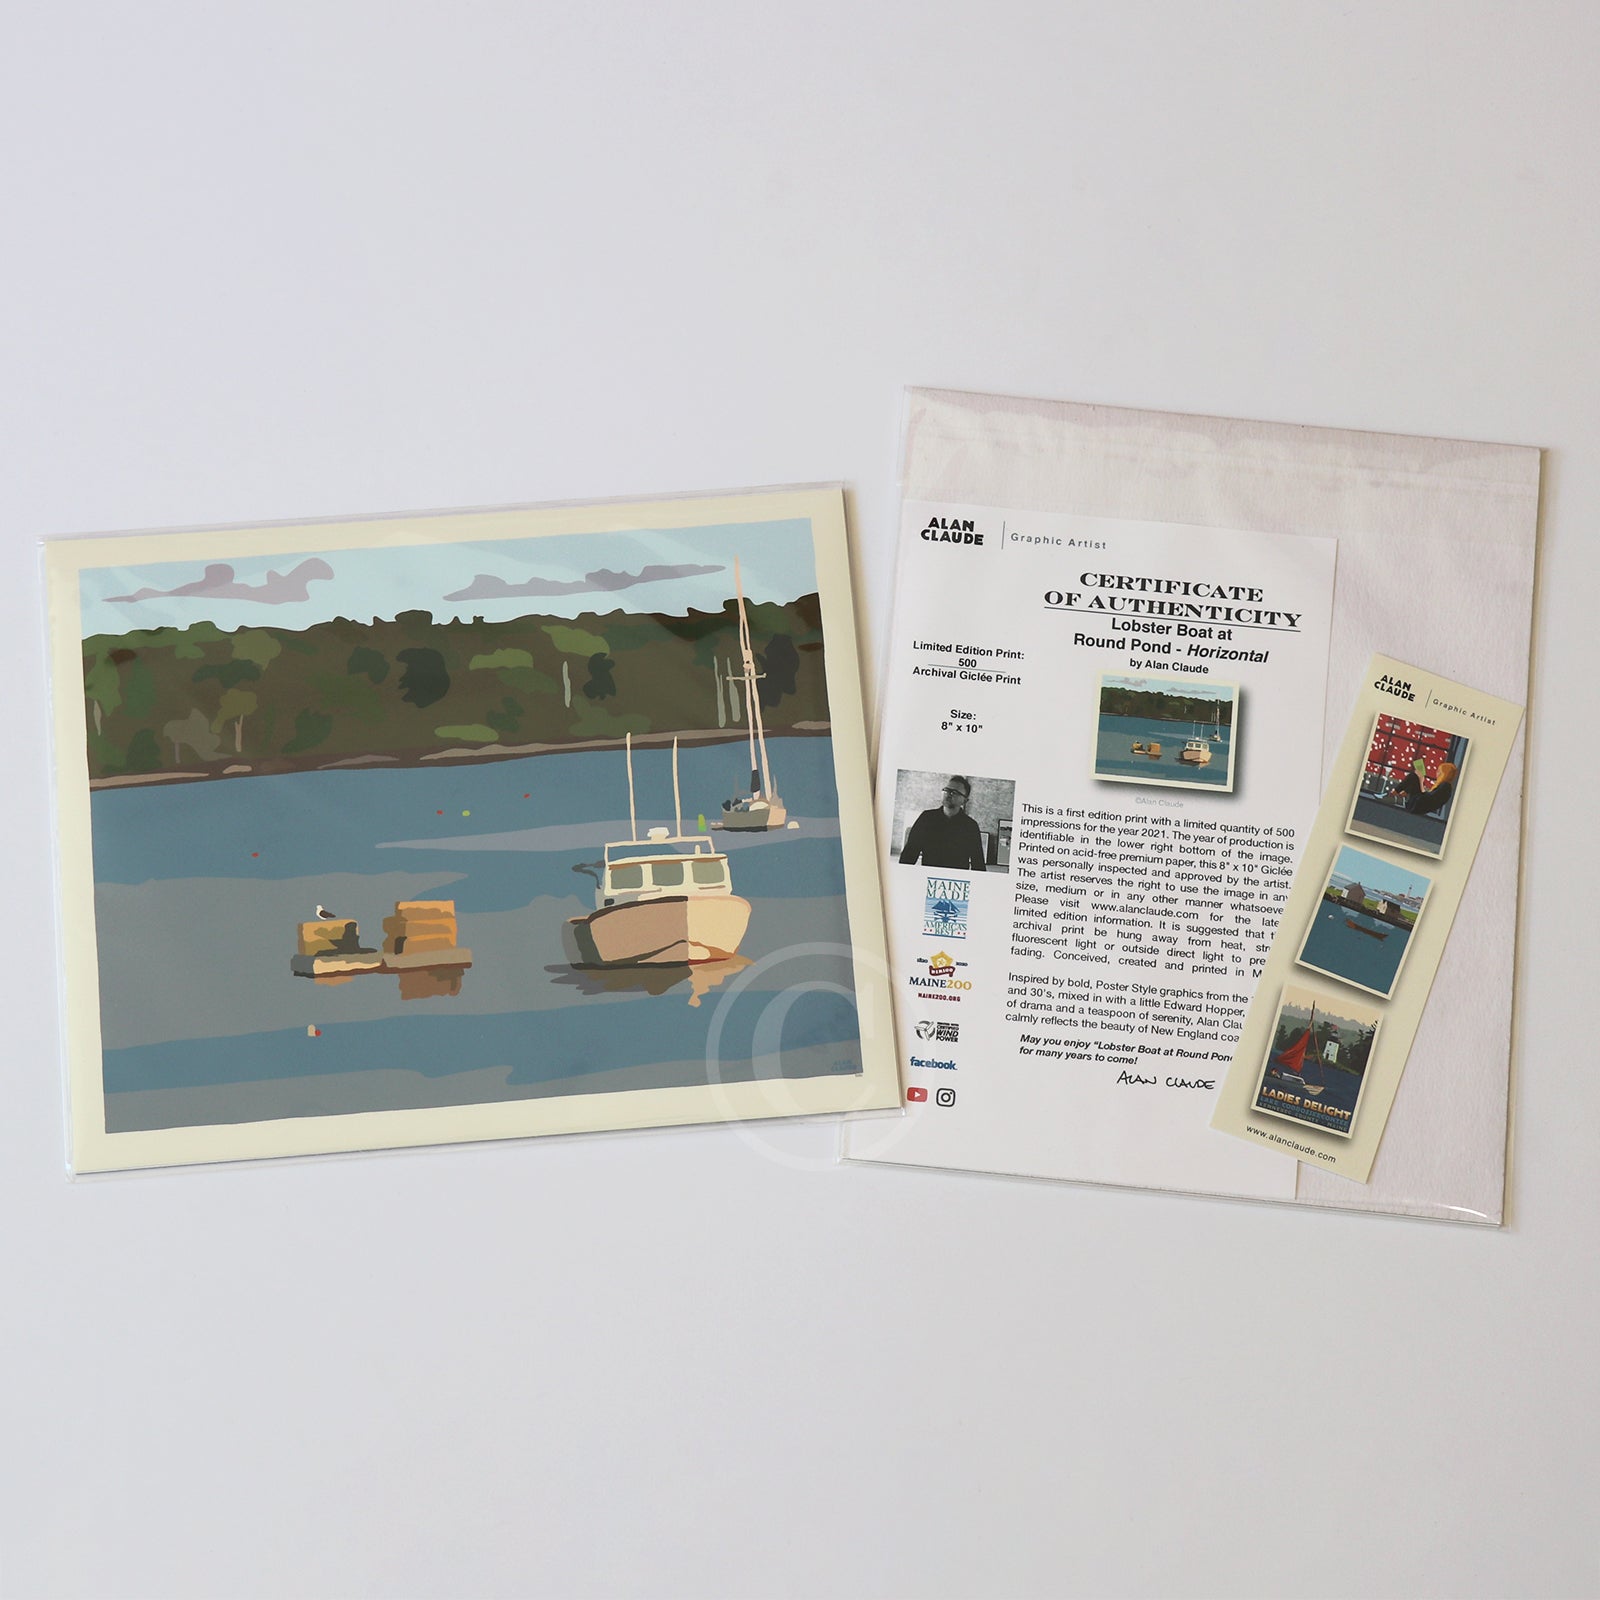 Lobster Boat in Round Pond Harbor Art Print 8" x 10” Horizontal Wall Poster By Alan Claude - Maine